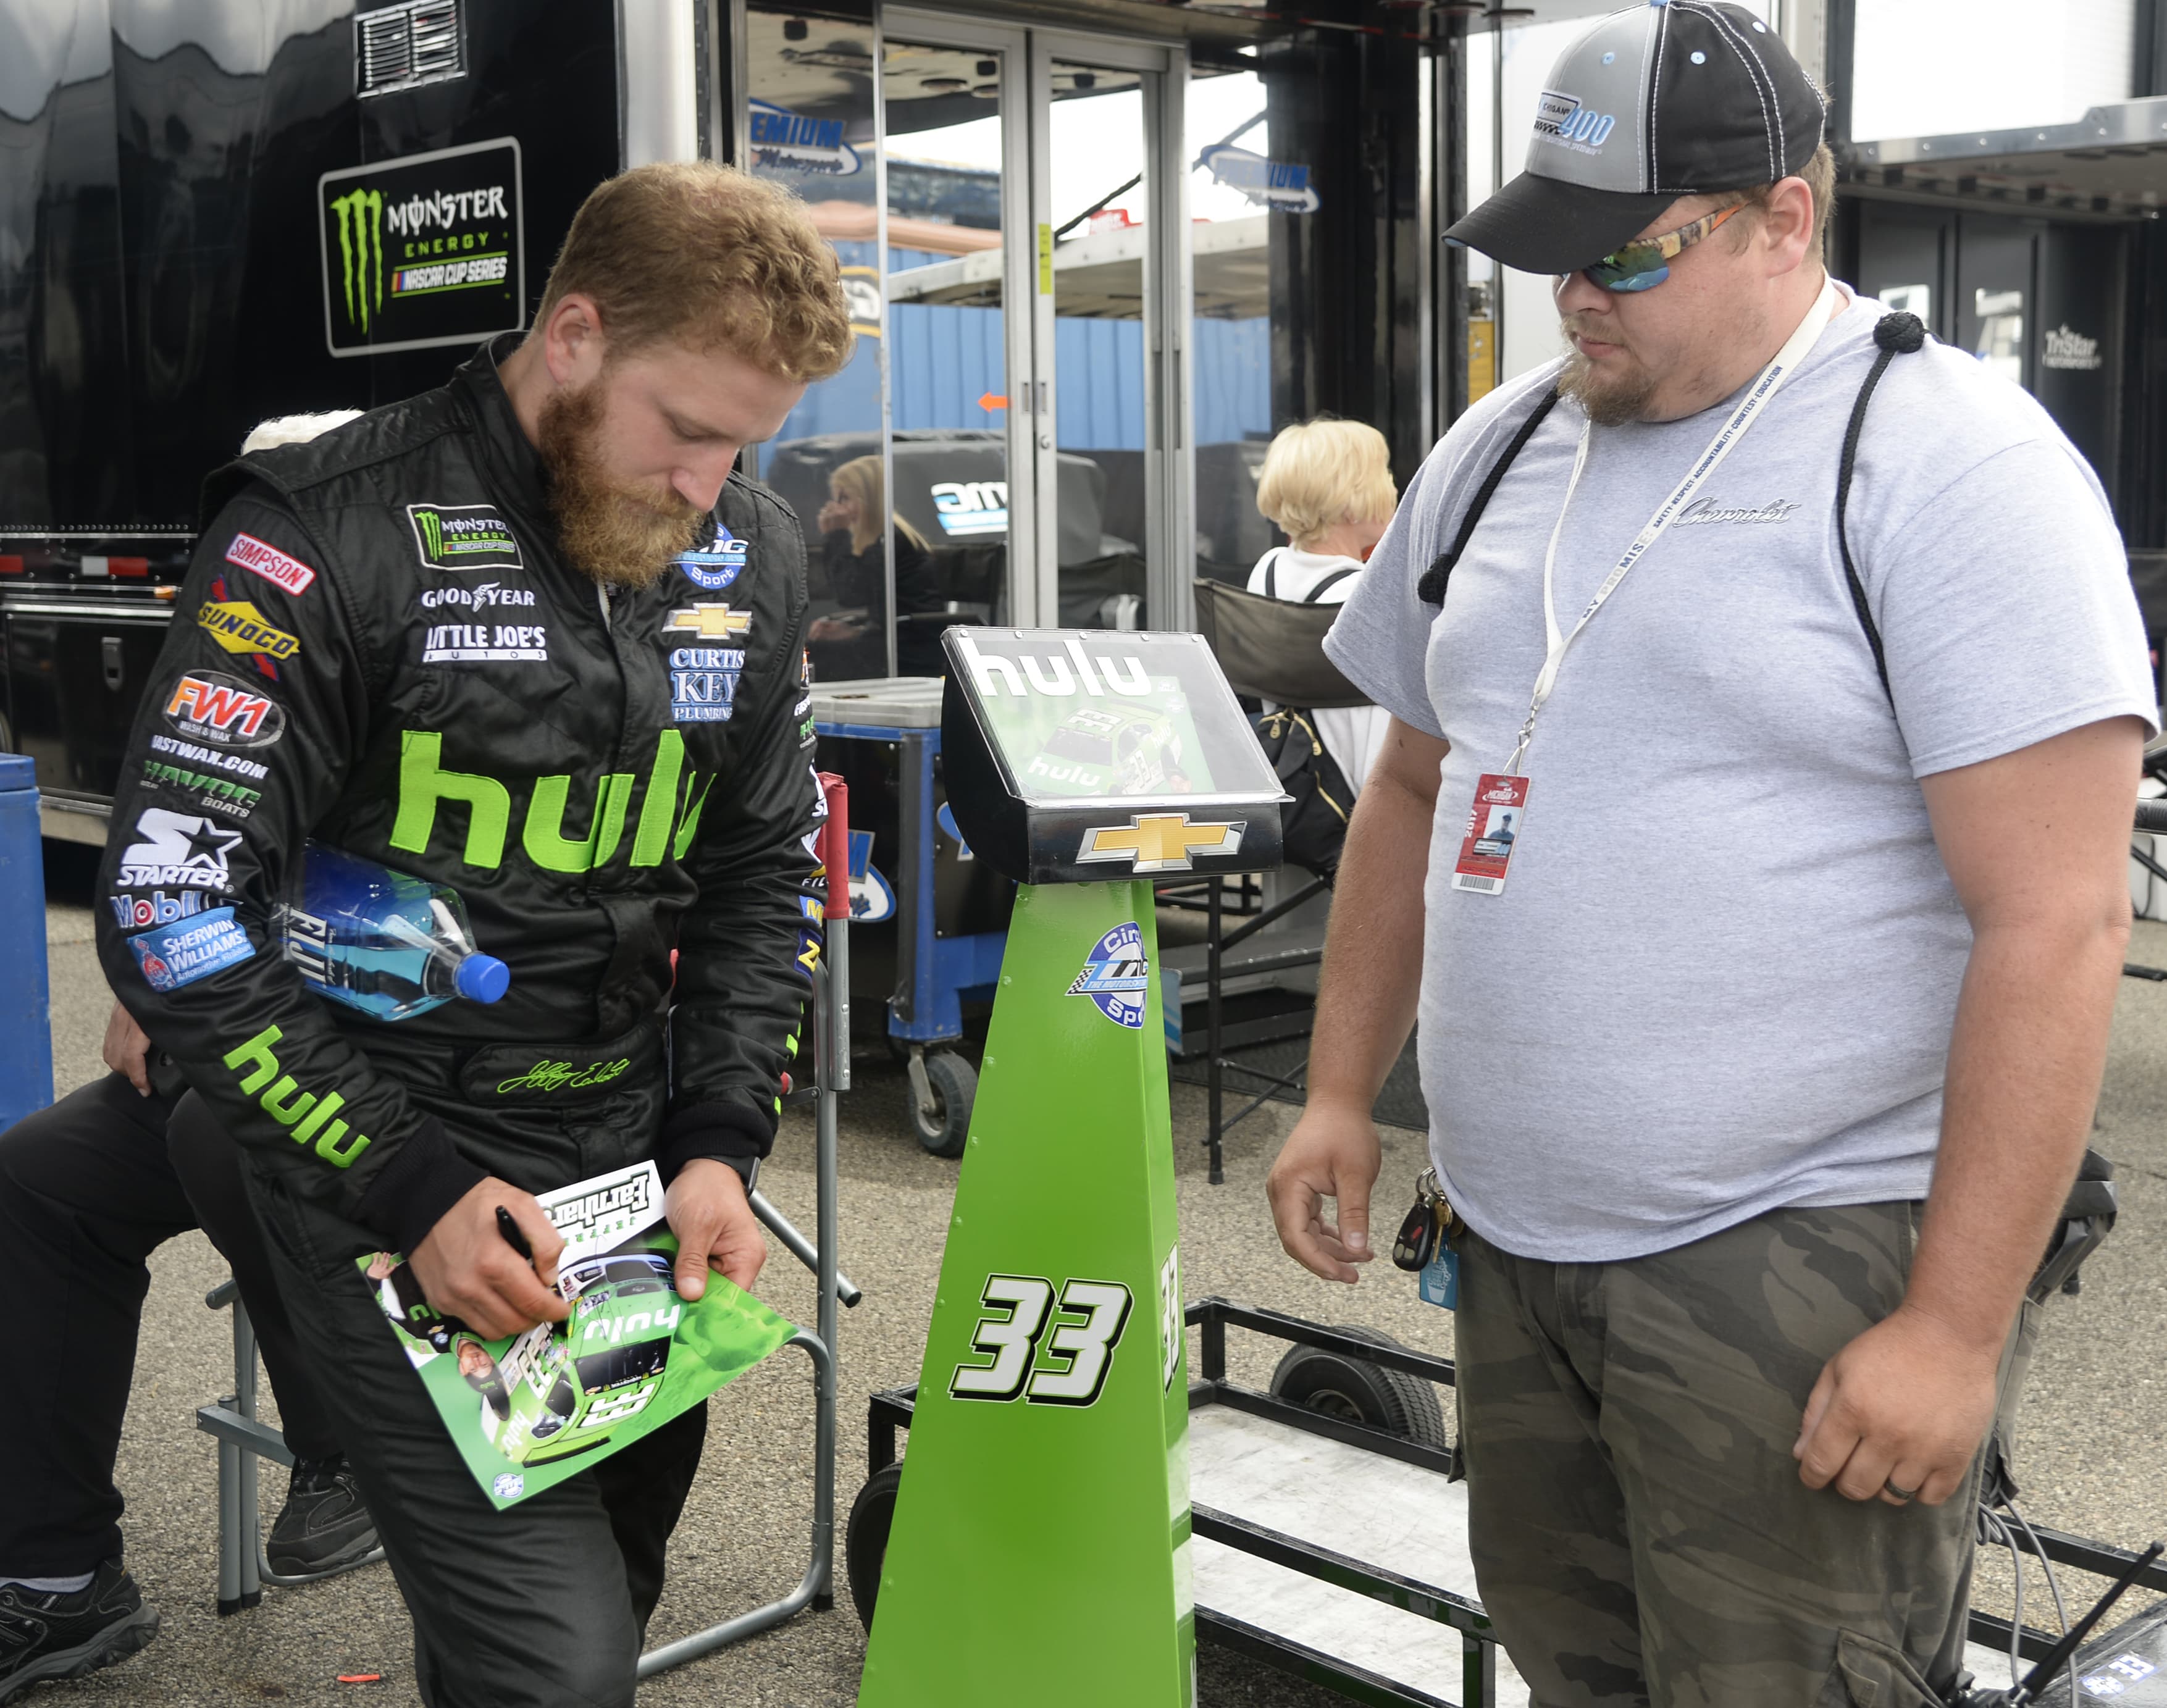 Saturday at Michigan International Speedway, Practice and Truck Race2017 Monster Energy NASCAR Cup Series